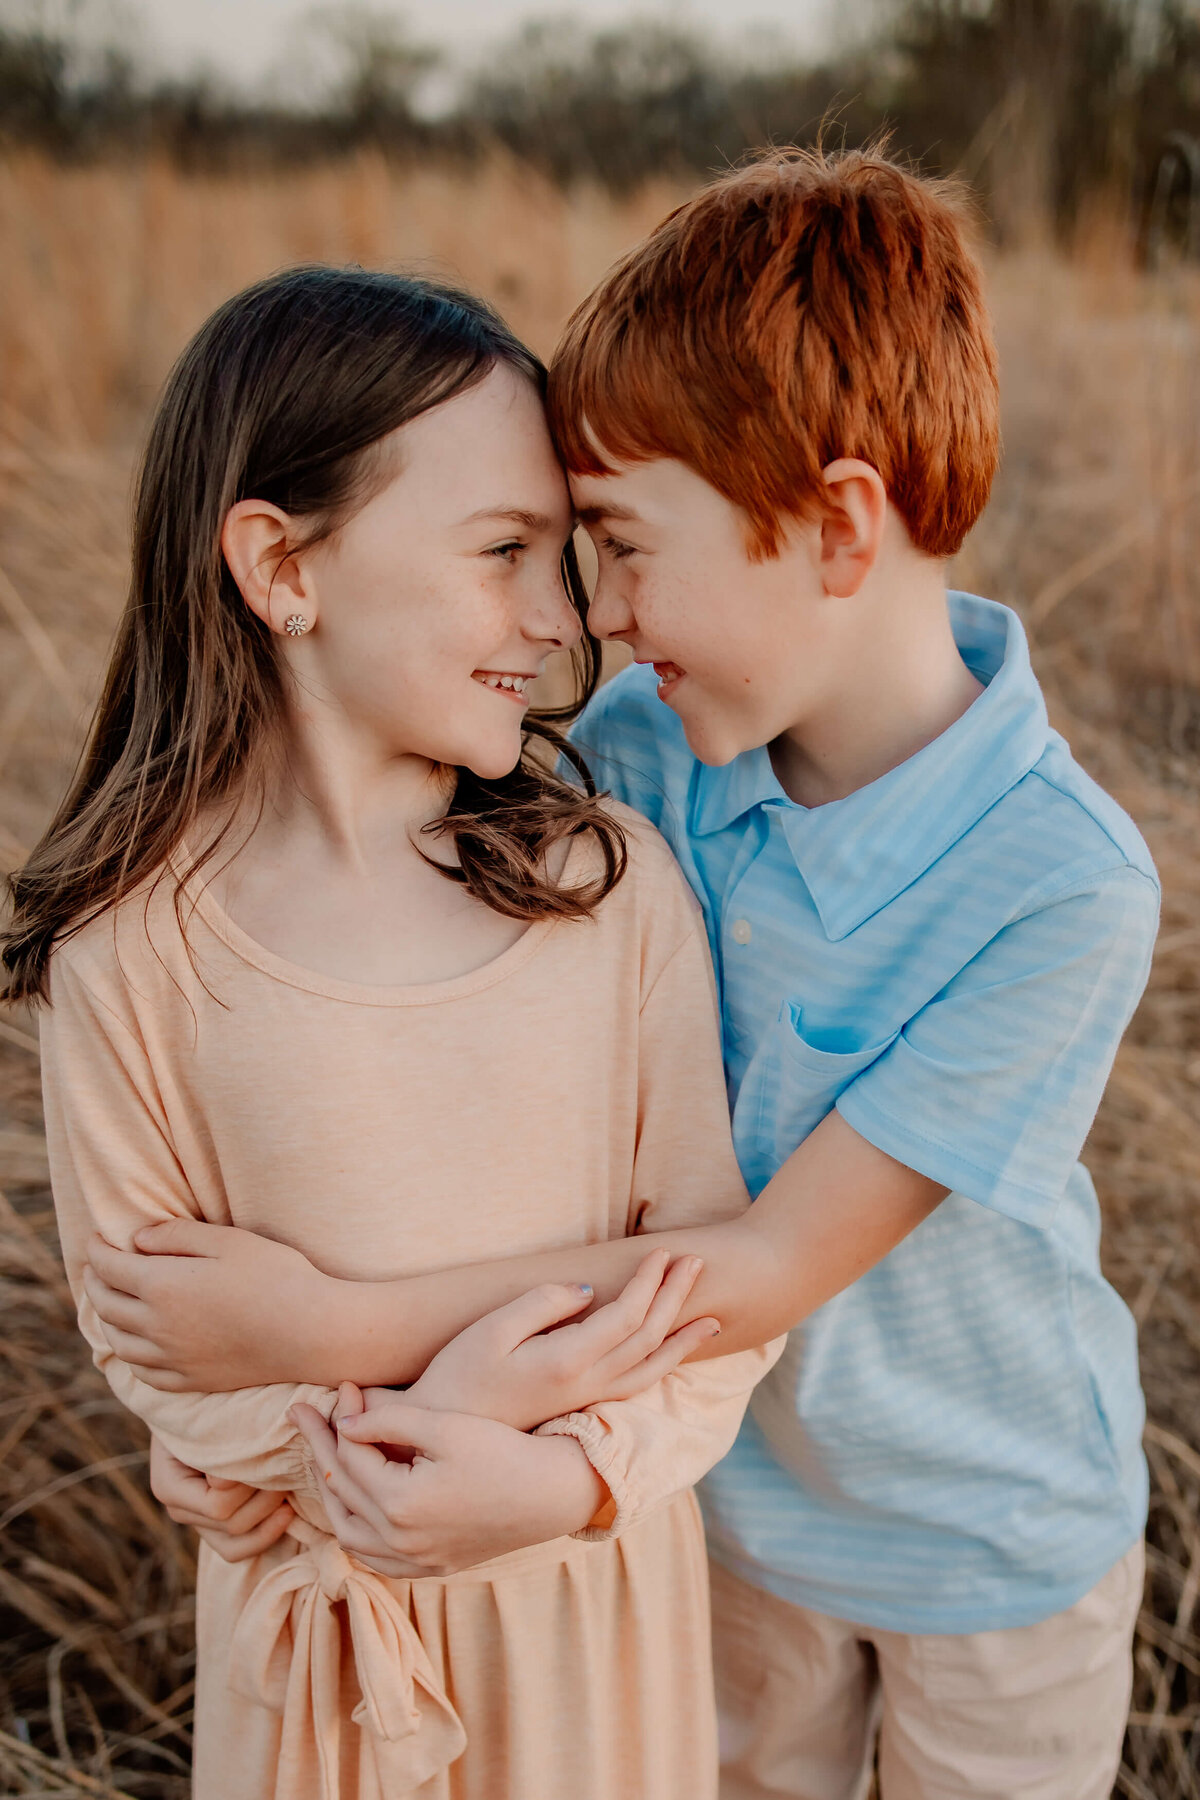 a red haired boy holding onto a brown hared girl both about 8 years old, standing in a field looking at eachother nose to nose